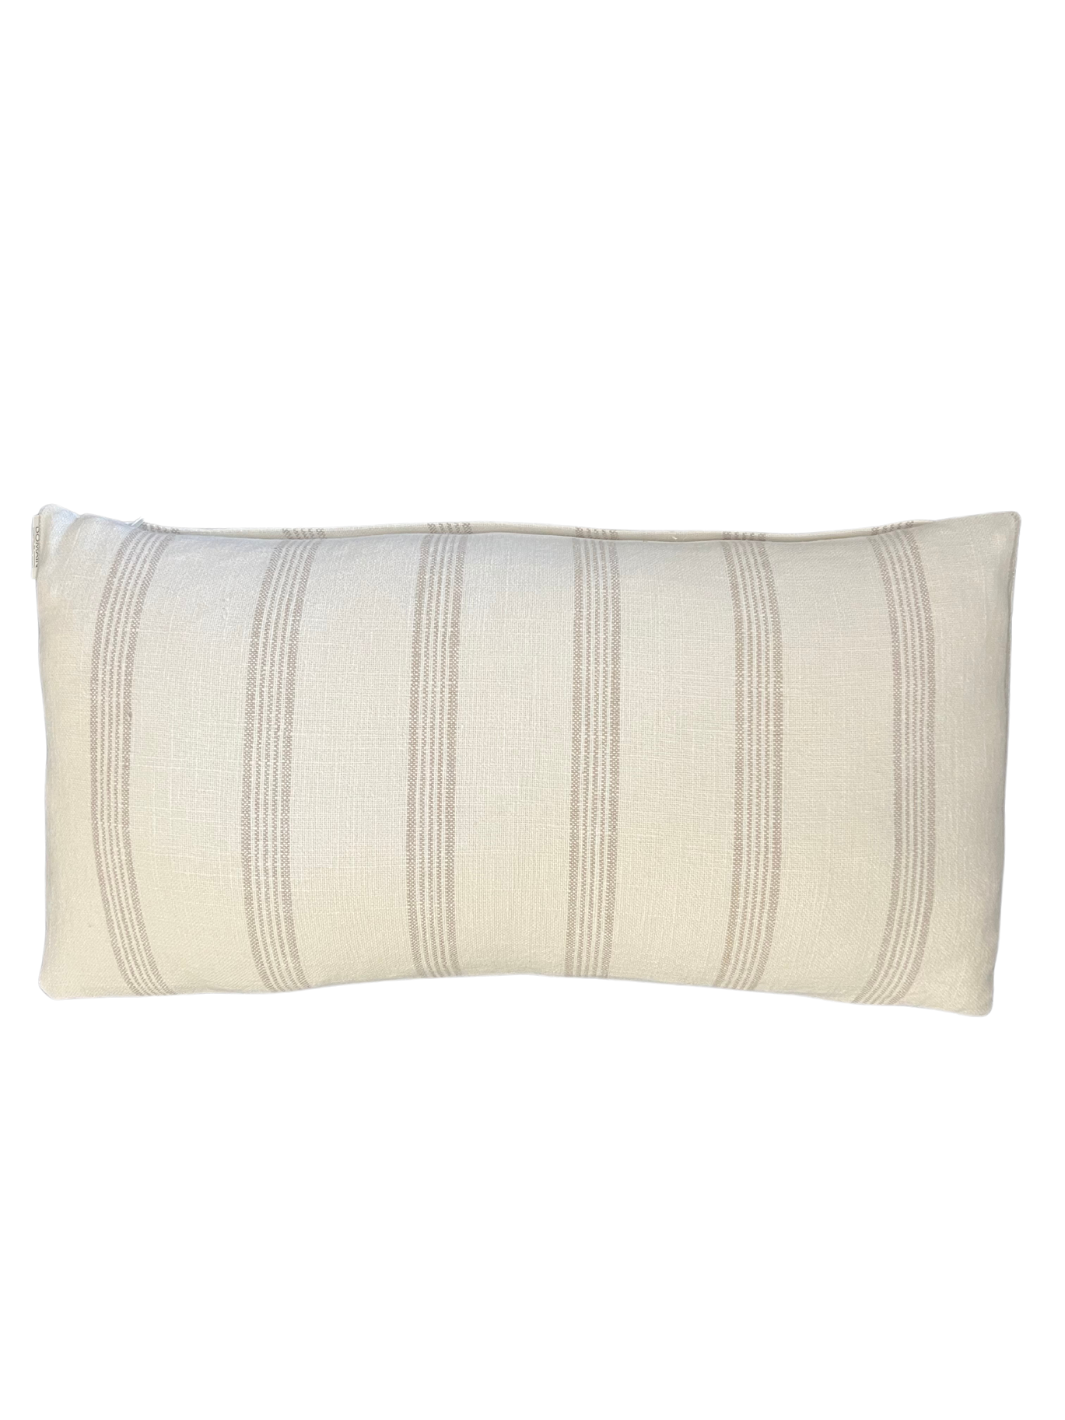 White and Beige Pinstripes Lumbar Pillow